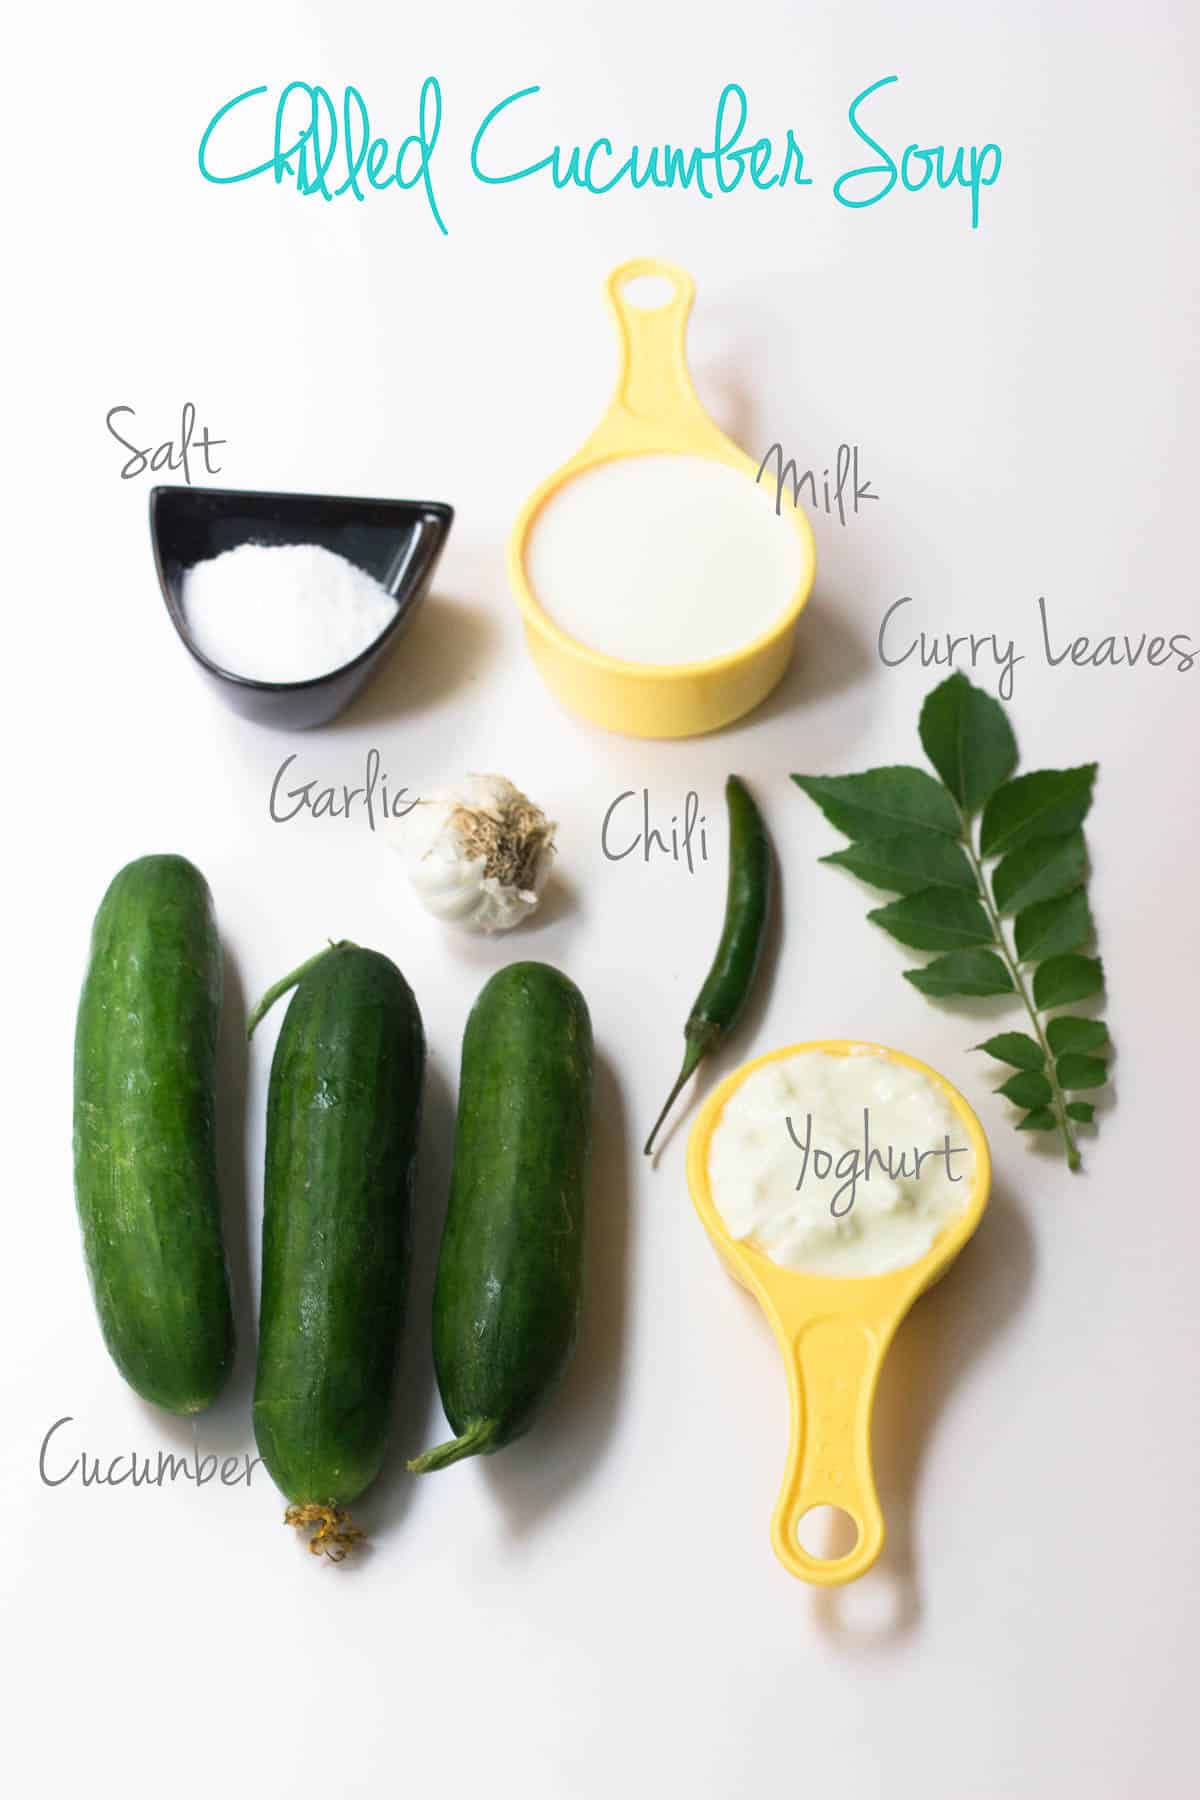 A picture of the ingredients of Chilled Cucumber Soup, labelled.